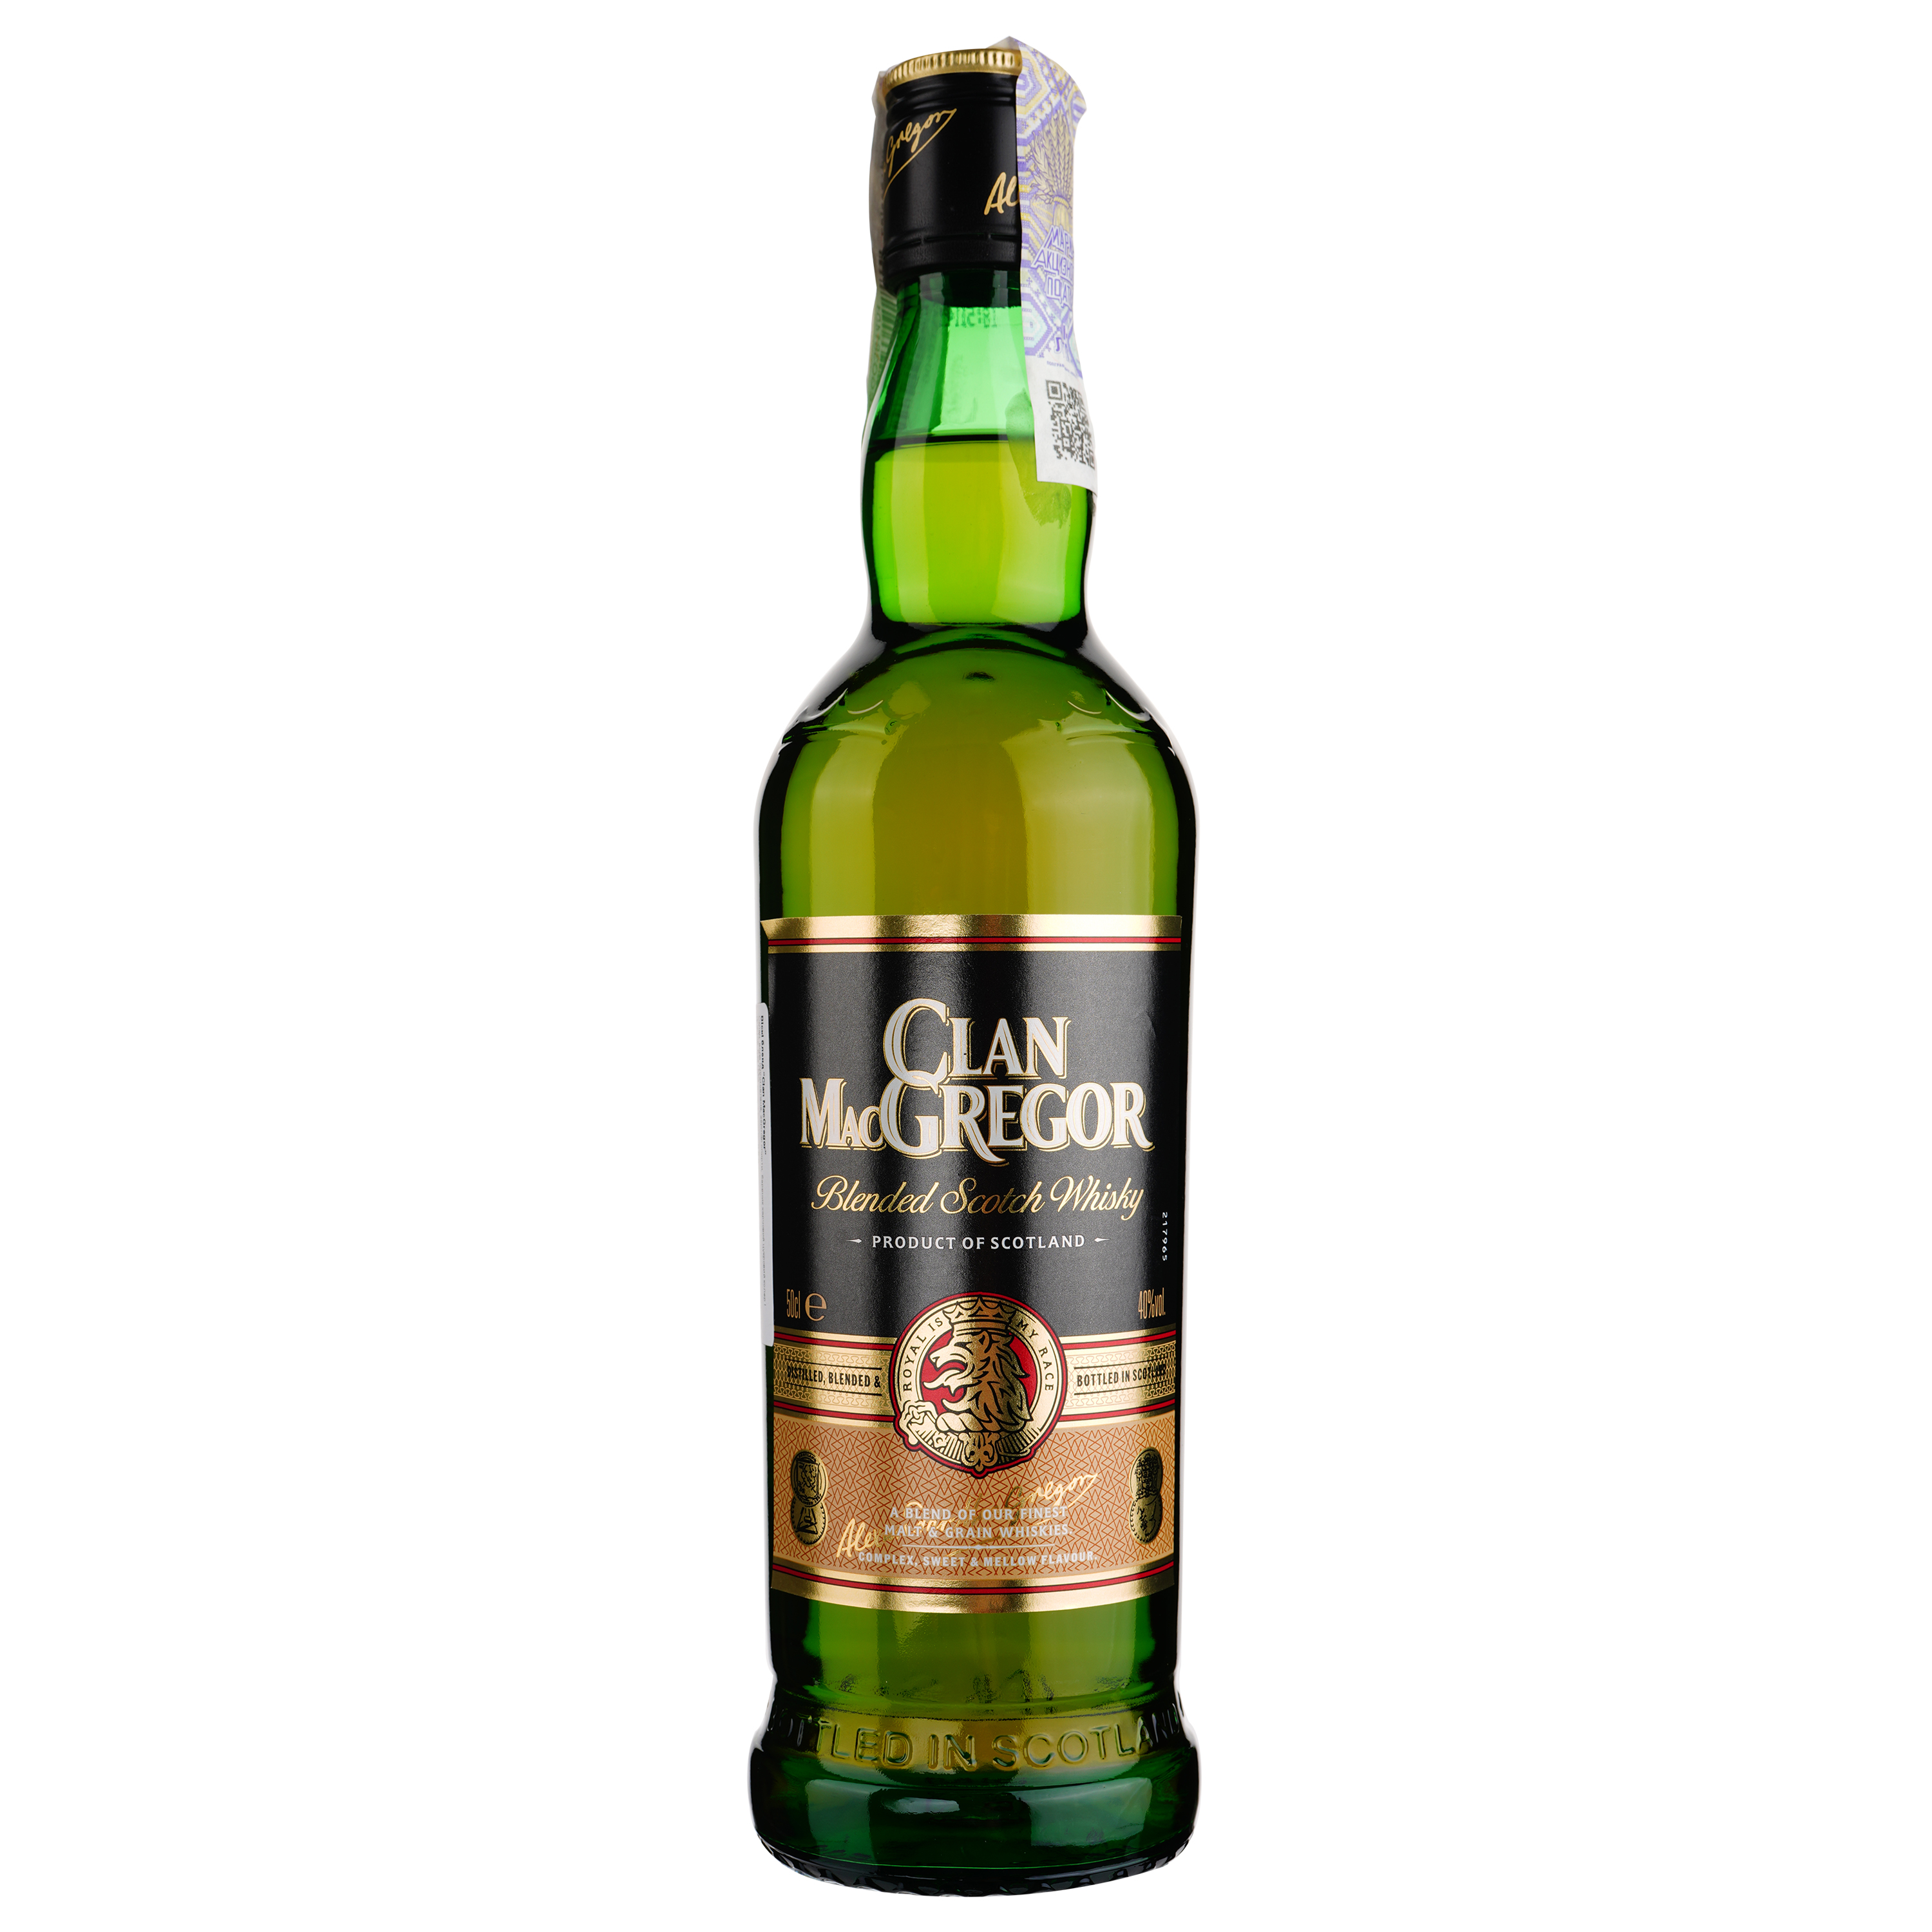 Виски Clan MacGregor Blended Scotch Whisky, 40%, 0,5 л - фото 1